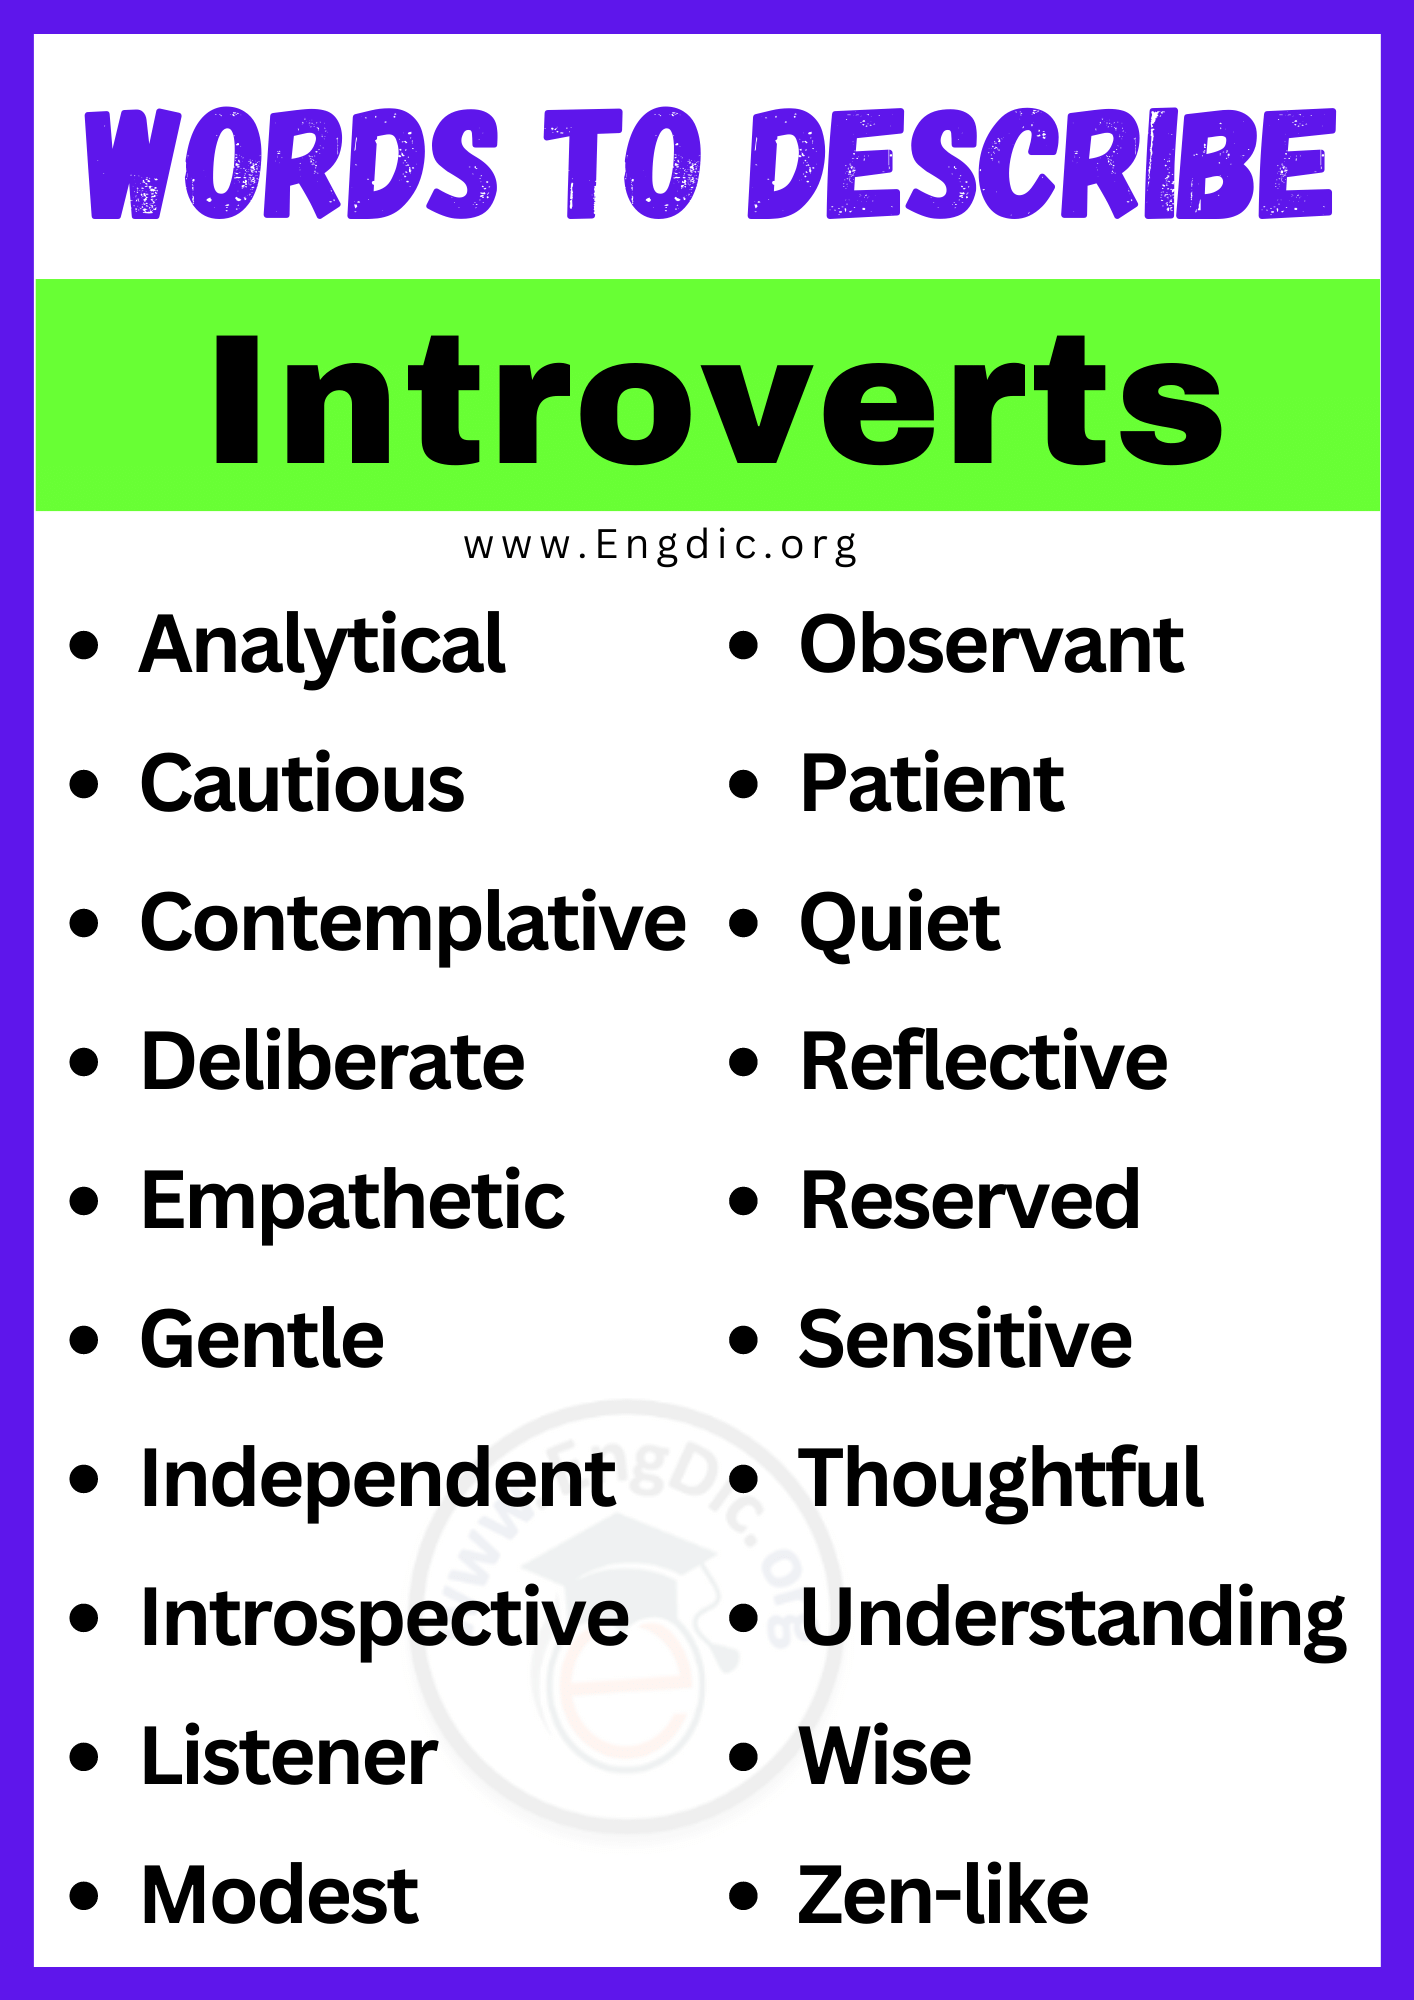 Words to Describe Introverts